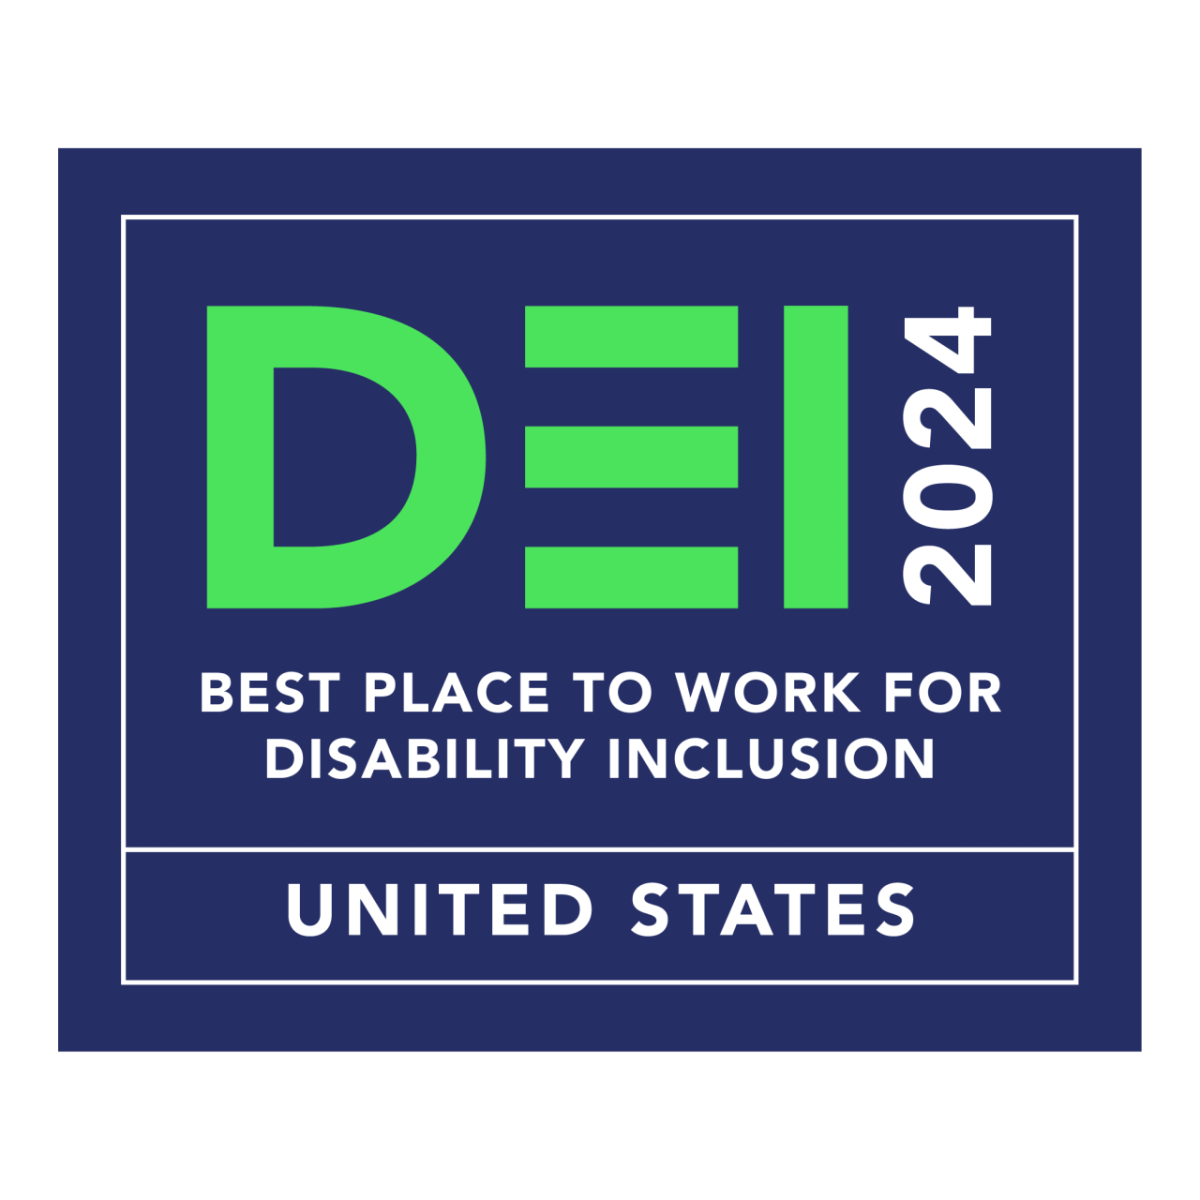 "DEI 2024 Best place to work for Disability Inclusion United States"